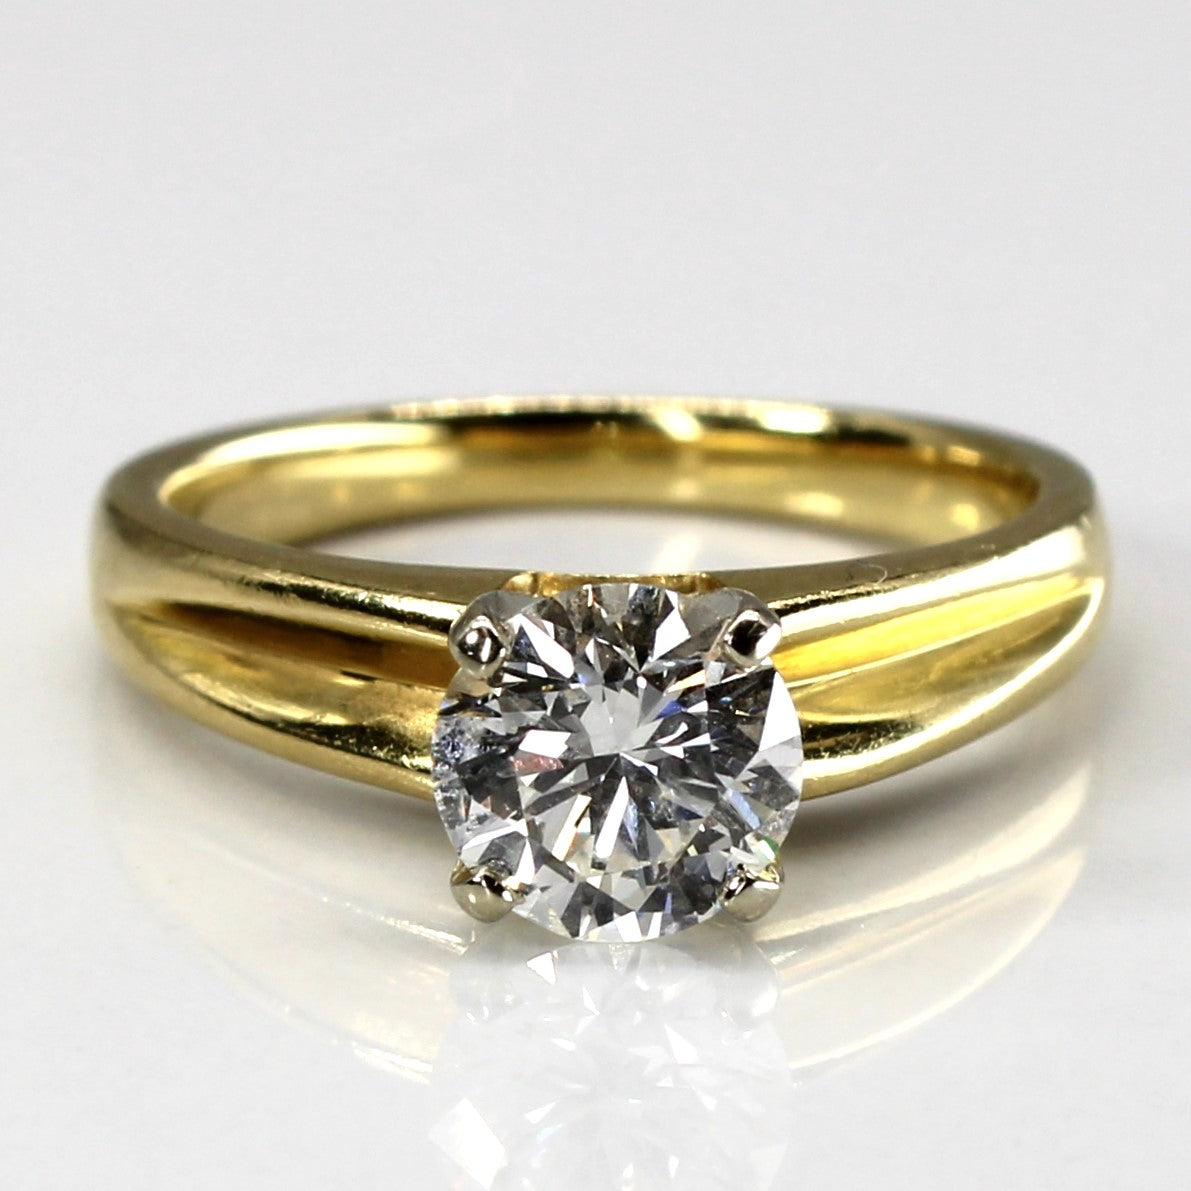 Solitaire Diamond Yellow Gold Ring | 1.03ct SI2/I1 G/H | SZ 5.75 |